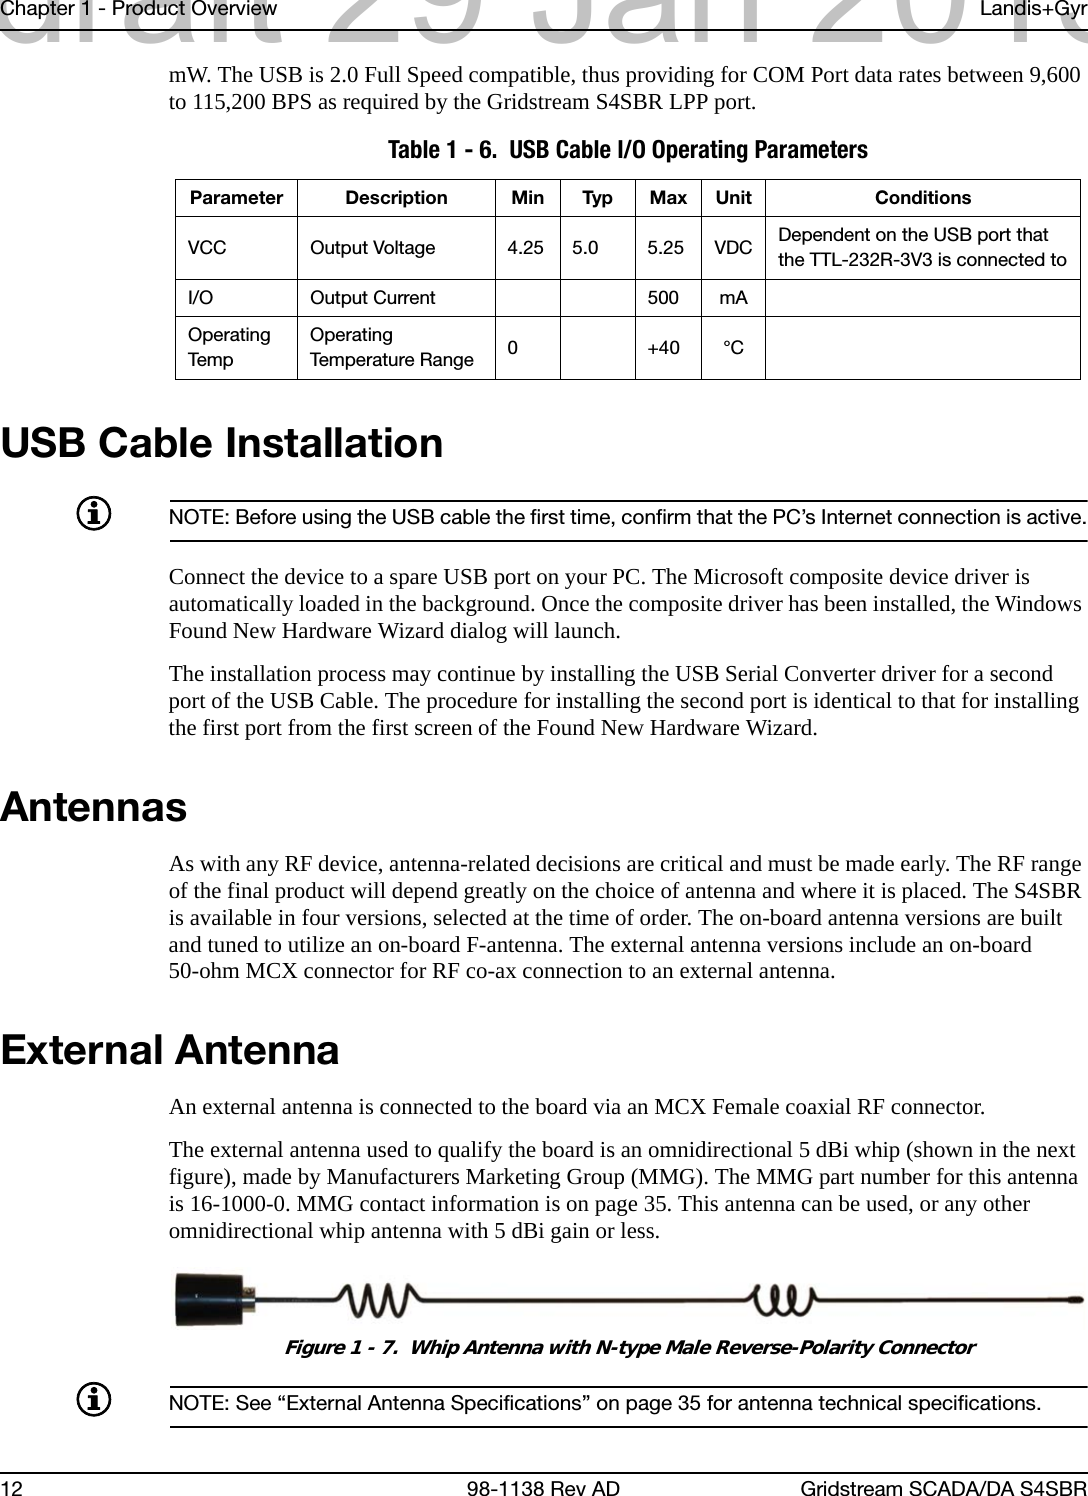 Chapter 1 - Product Overview Landis+Gyr12 98-1138 Rev AD Gridstream SCADA/DA S4SBRmW. The USB is 2.0 Full Speed compatible, thus providing for COM Port data rates between 9,600 to 115,200 BPS as required by the Gridstream S4SBR LPP port.USB Cable InstallationNOTE: Before using the USB cable the first time, confirm that the PC’s Internet connection is active.Connect the device to a spare USB port on your PC. The Microsoft composite device driver is automatically loaded in the background. Once the composite driver has been installed, the Windows Found New Hardware Wizard dialog will launch.The installation process may continue by installing the USB Serial Converter driver for a second port of the USB Cable. The procedure for installing the second port is identical to that for installing the first port from the first screen of the Found New Hardware Wizard.AntennasAs with any RF device, antenna-related decisions are critical and must be made early. The RF range of the final product will depend greatly on the choice of antenna and where it is placed. The S4SBR is available in four versions, selected at the time of order. The on-board antenna versions are built and tuned to utilize an on-board F-antenna. The external antenna versions include an on-board 50-ohm MCX connector for RF co-ax connection to an external antenna.External AntennaAn external antenna is connected to the board via an MCX Female coaxial RF connector.The external antenna used to qualify the board is an omnidirectional 5 dBi whip (shown in the next figure), made by Manufacturers Marketing Group (MMG). The MMG part number for this antenna is 16-1000-0. MMG contact information is on page 35. This antenna can be used, or any other omnidirectional whip antenna with 5 dBi gain or less.Figure 1 - 7.  Whip Antenna with N-type Male Reverse-Polarity ConnectorNOTE: See “External Antenna Specifications” on page 35 for antenna technical specifications.Table 1 - 6.  USB Cable I/O Operating ParametersParameter Description Min Typ Max Unit ConditionsVCC Output Voltage 4.25 5.0 5.25 VDC Dependent on the USB port that the TTL-232R-3V3 is connected toI/O Output Current 500 mAOperating Tem pOperating Temperature Range 0+40°Cdraft 29 Jan 2013